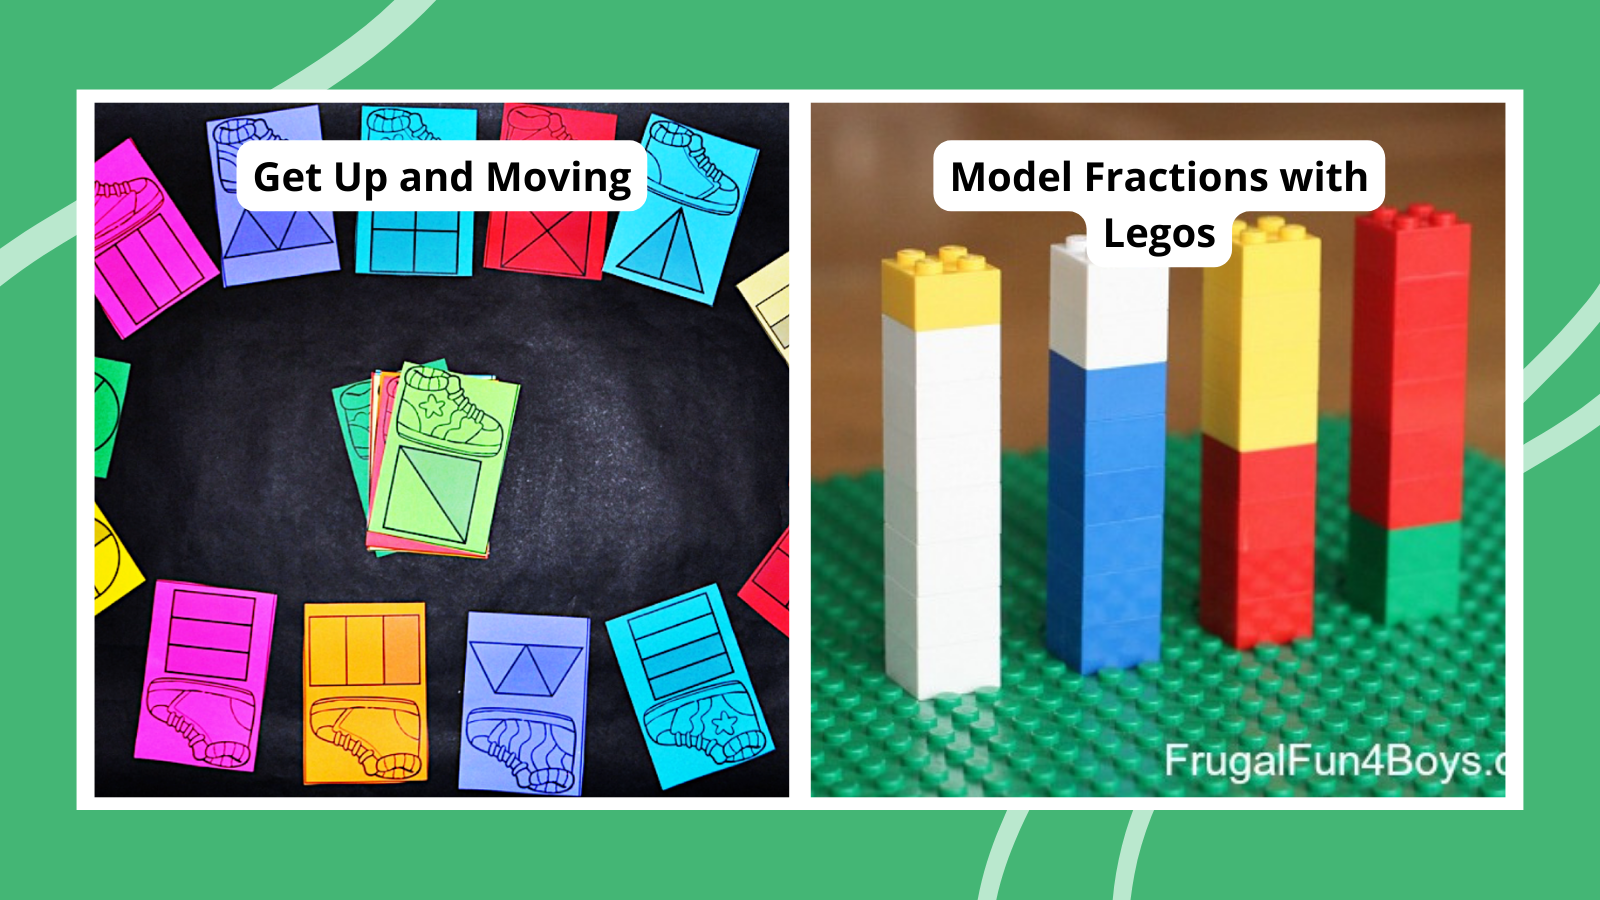 examples of fraction activities, playing a game with fraction task cards and building lego fractions